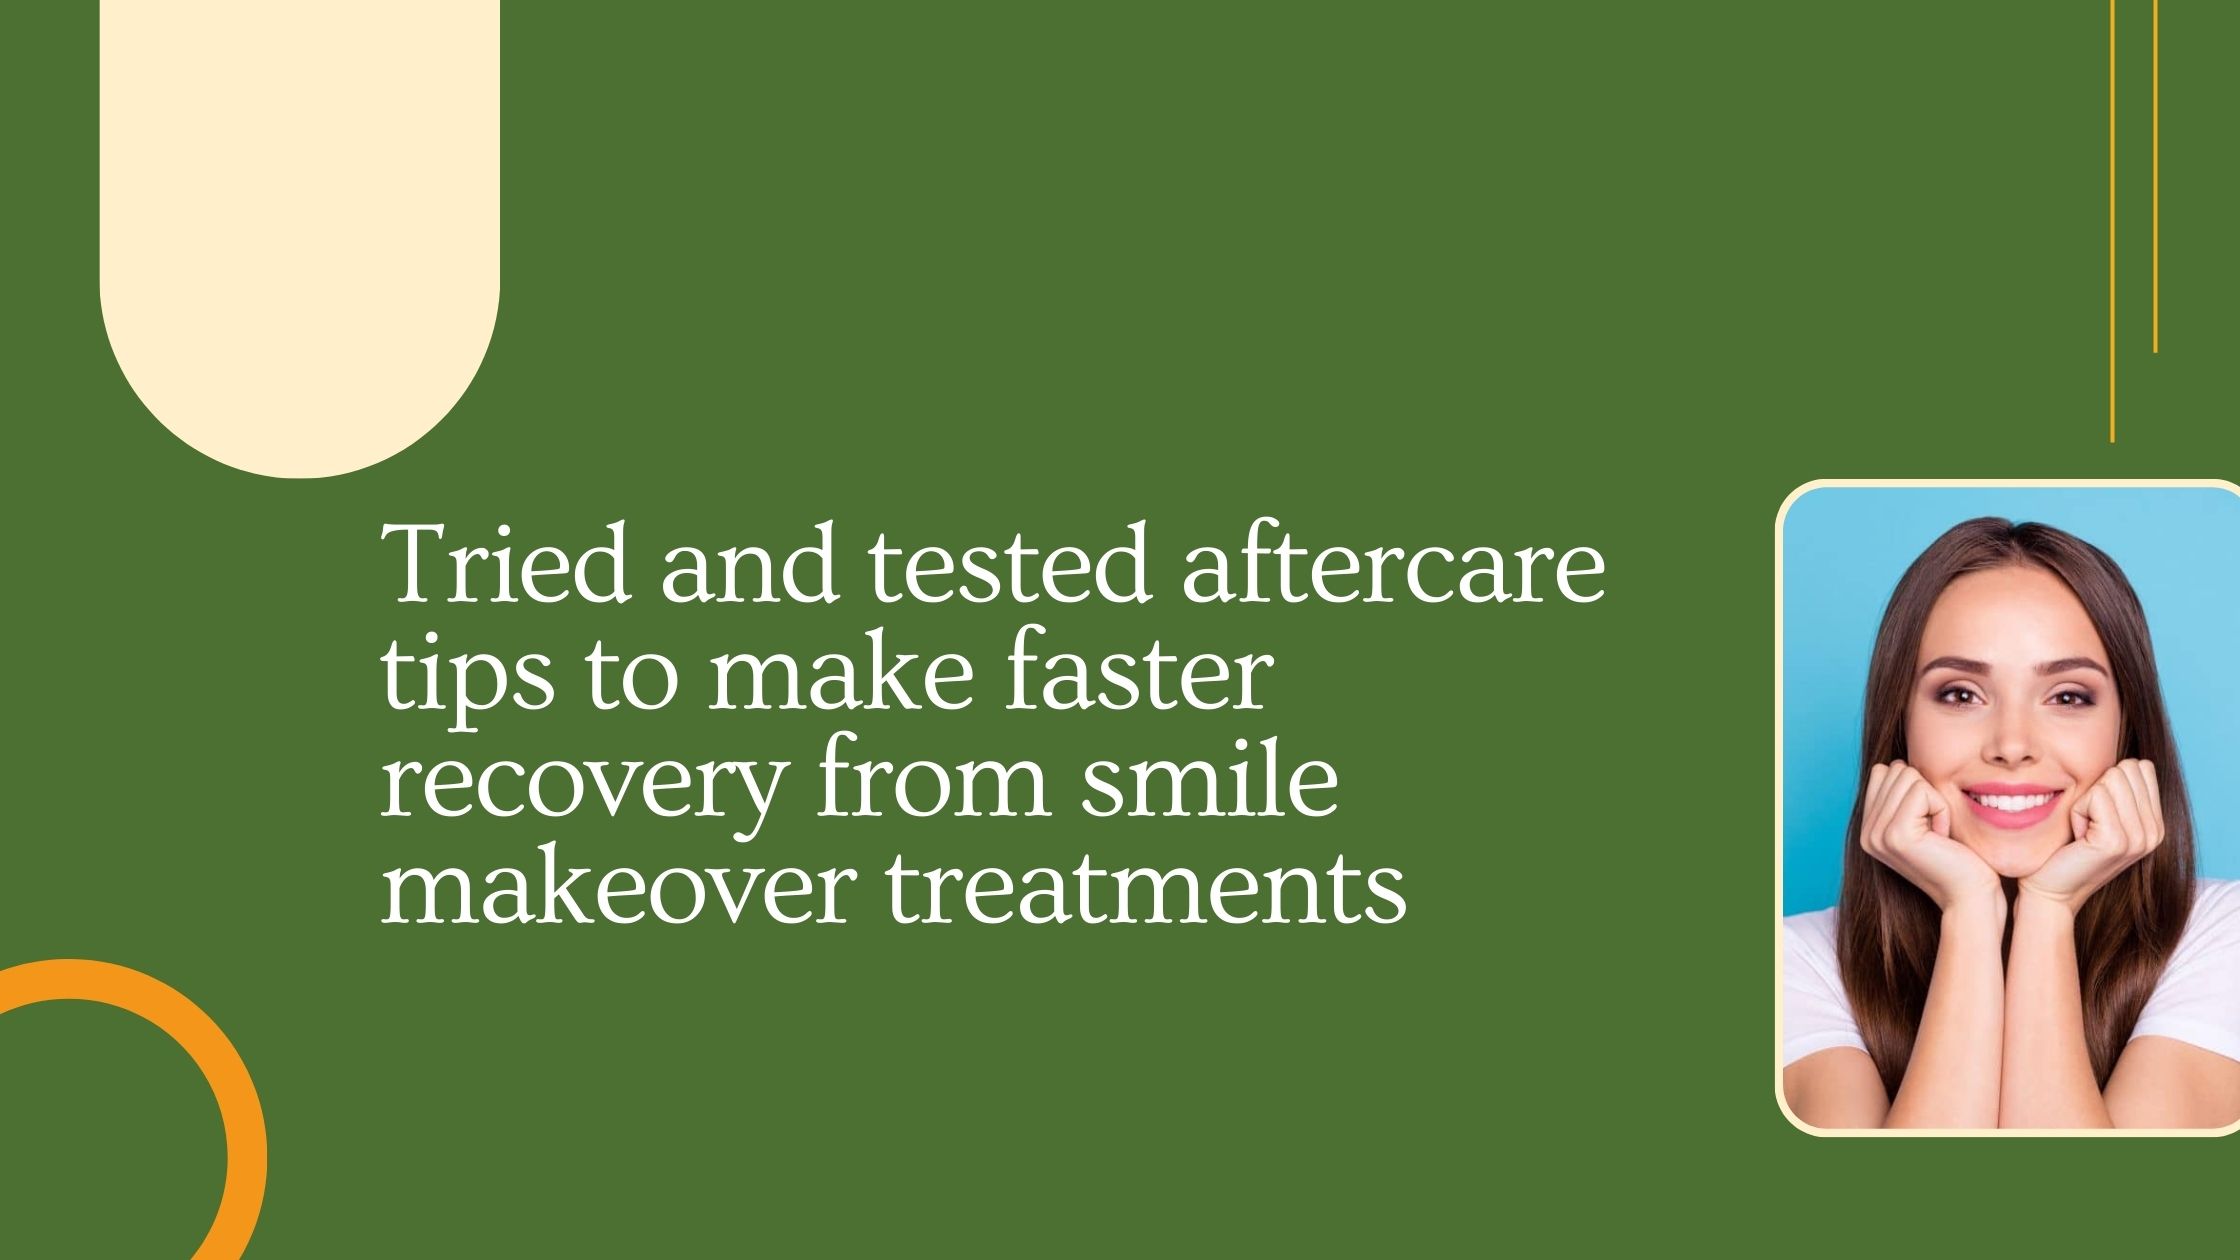 Tried and tested aftercare tips to make faster recovery from smile makeover treatments